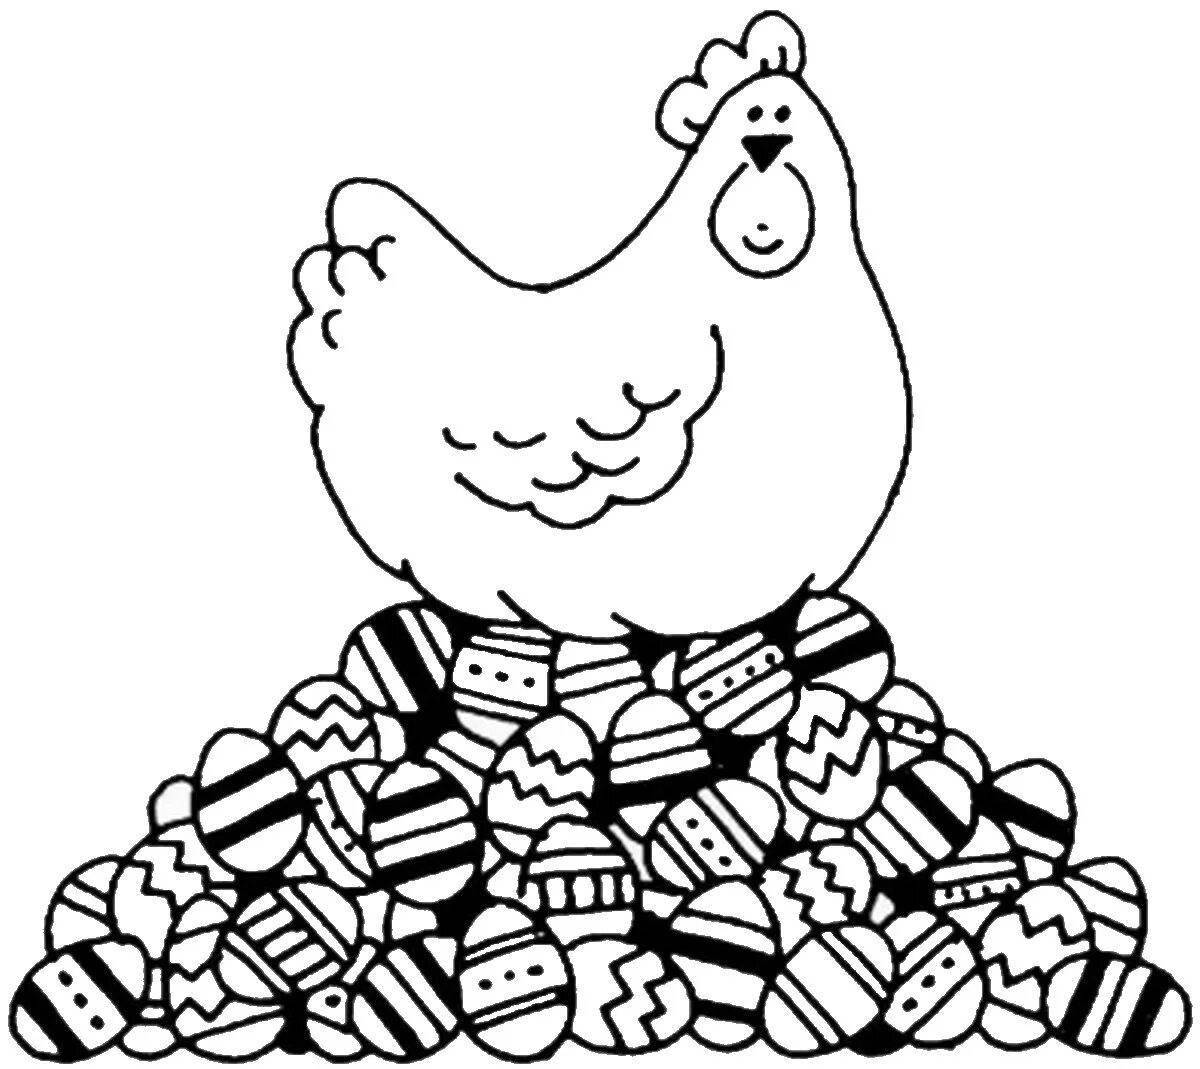 Coloring page adorable chicks